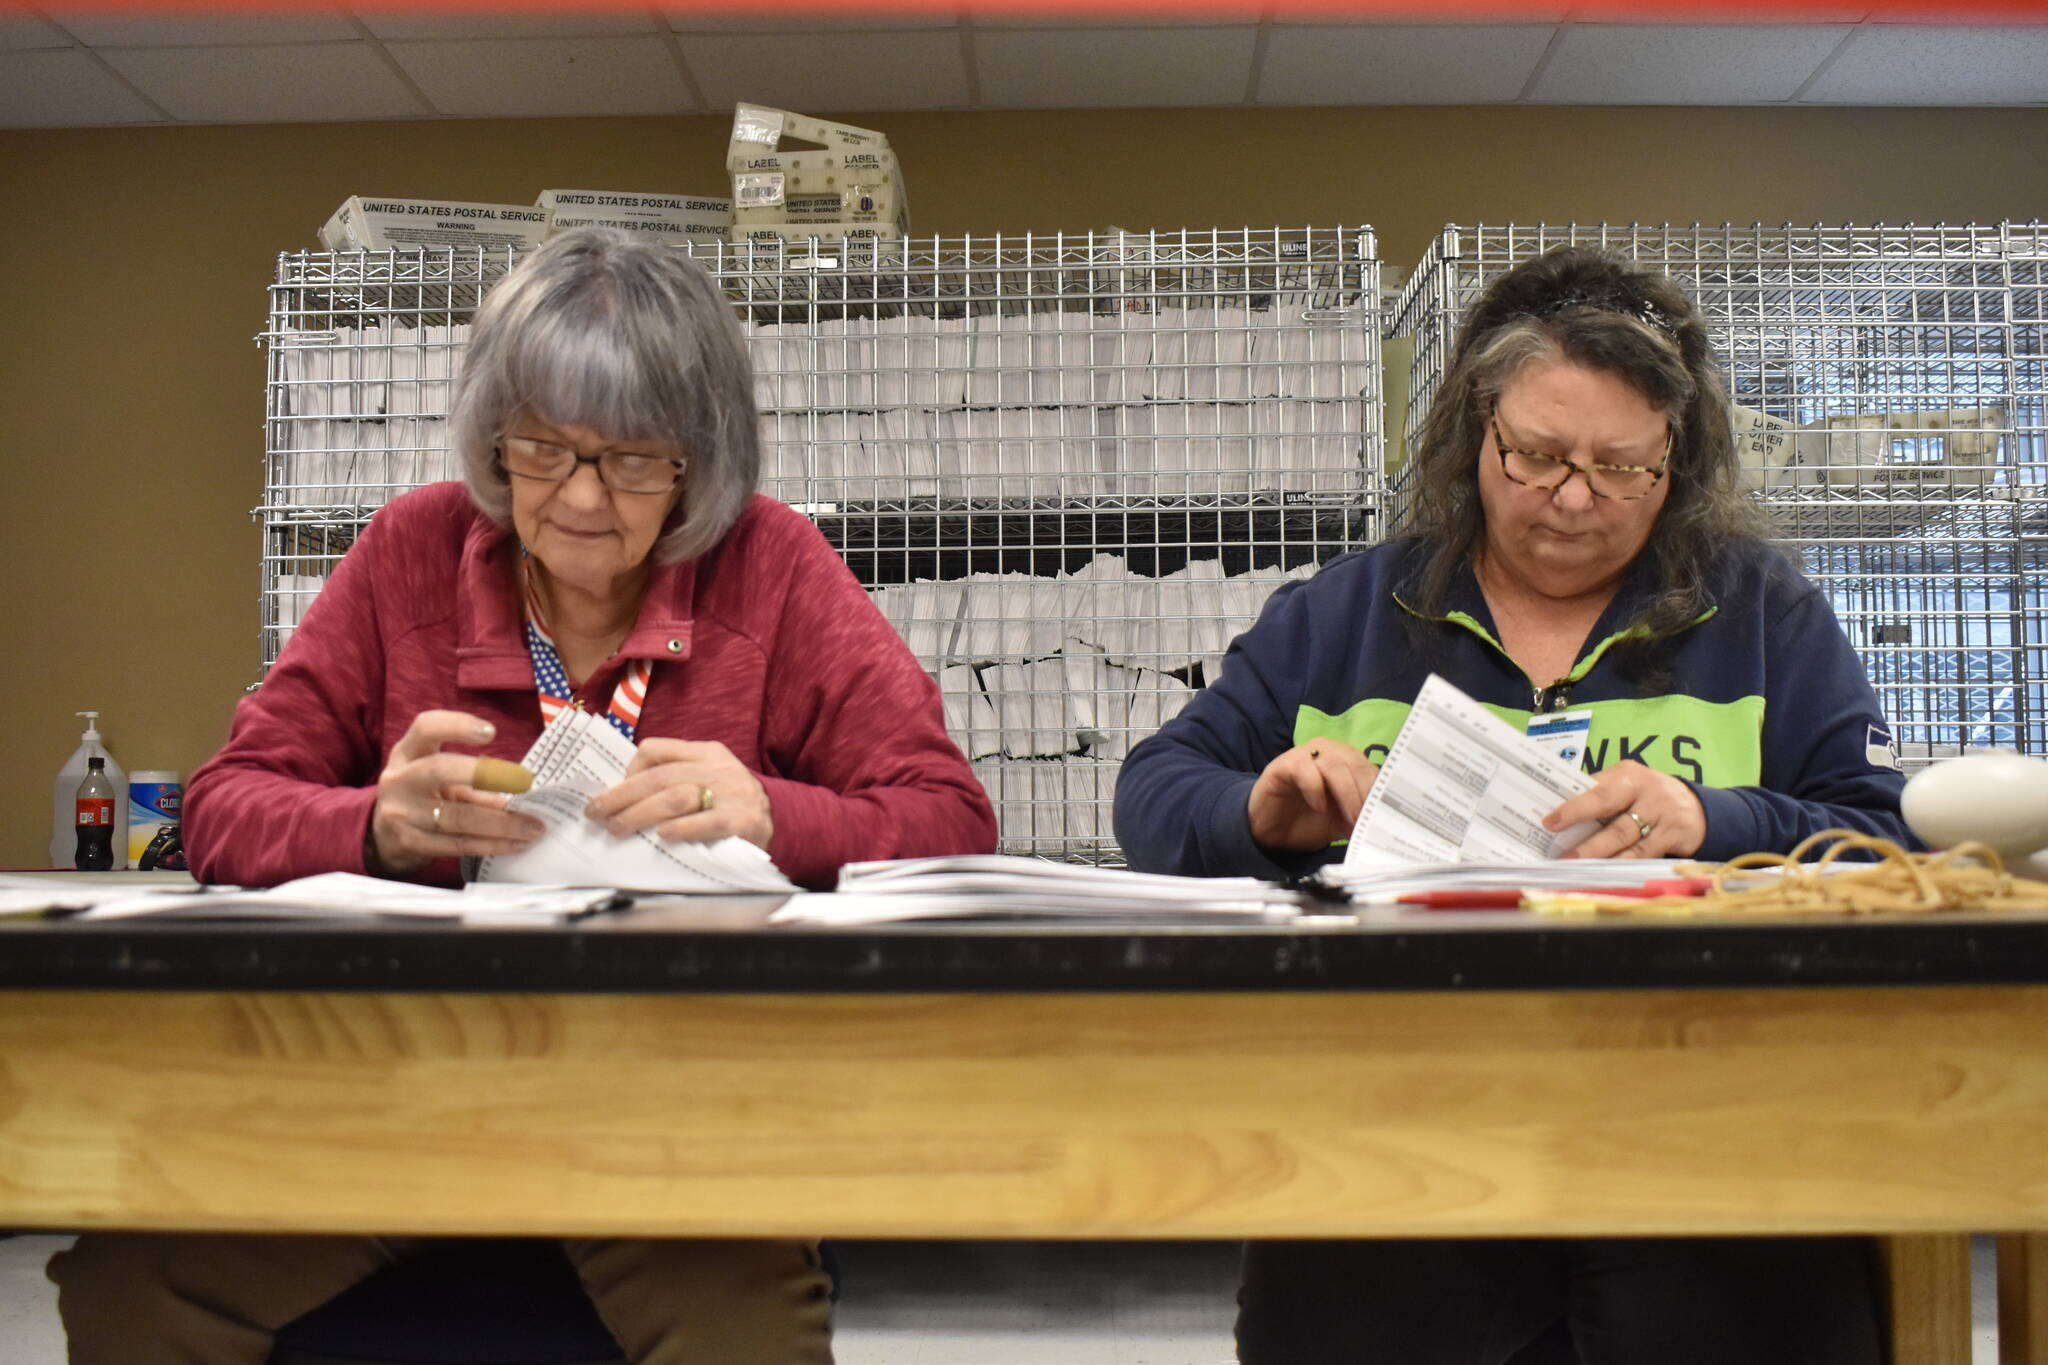 Grays Harbor County elections employees Sue Wilson and Debby Hammer recount ballots by hand at the county elections office in Montesano on Thursday, Dec. 7. (Clayton Franke / The Daily World)